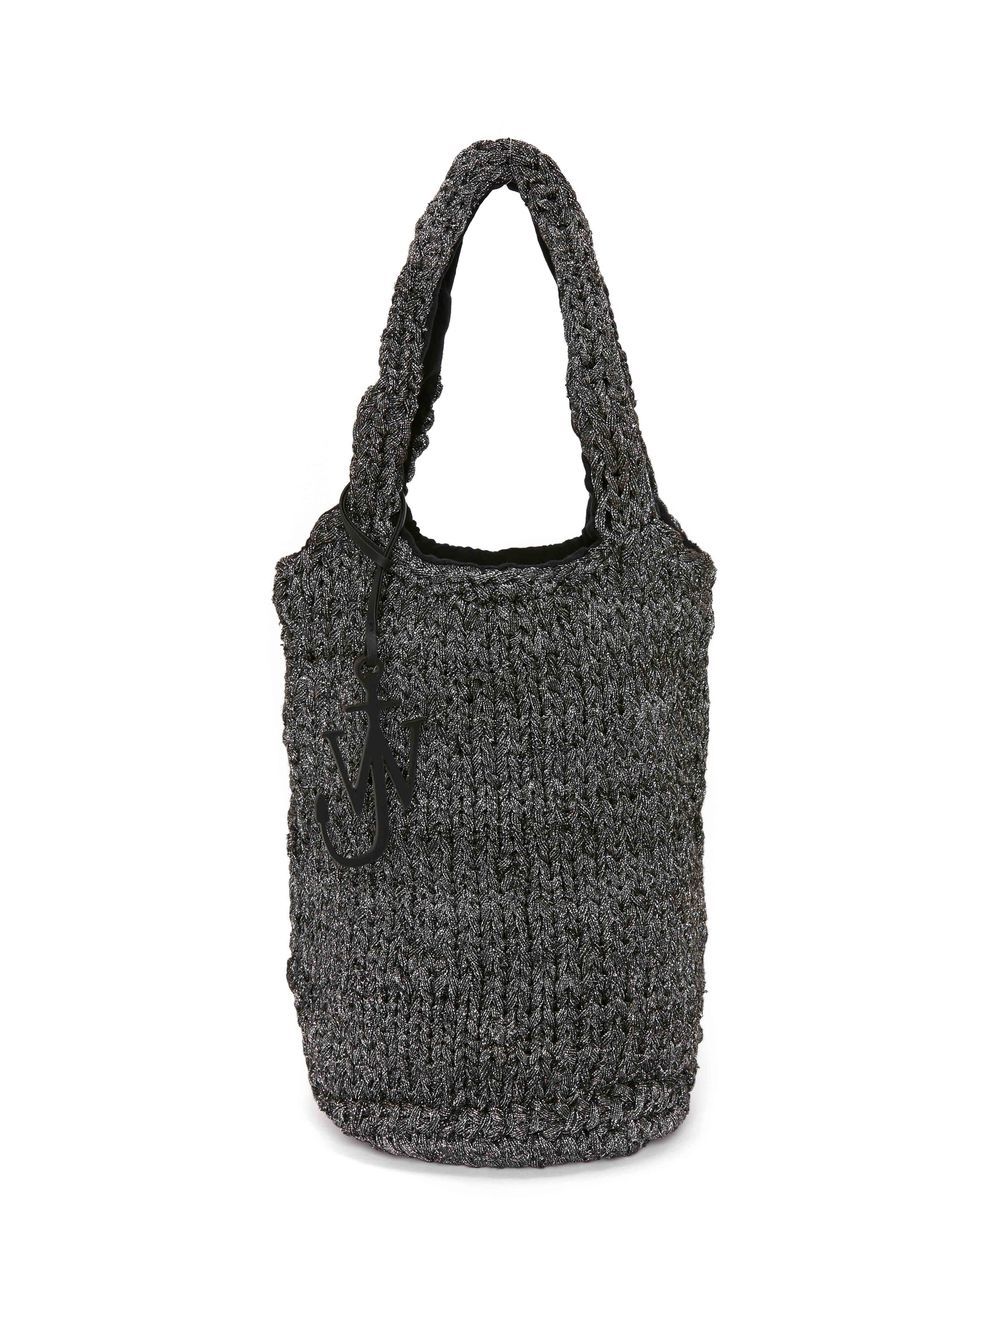 JW Anderson knitted tote bag - Grey